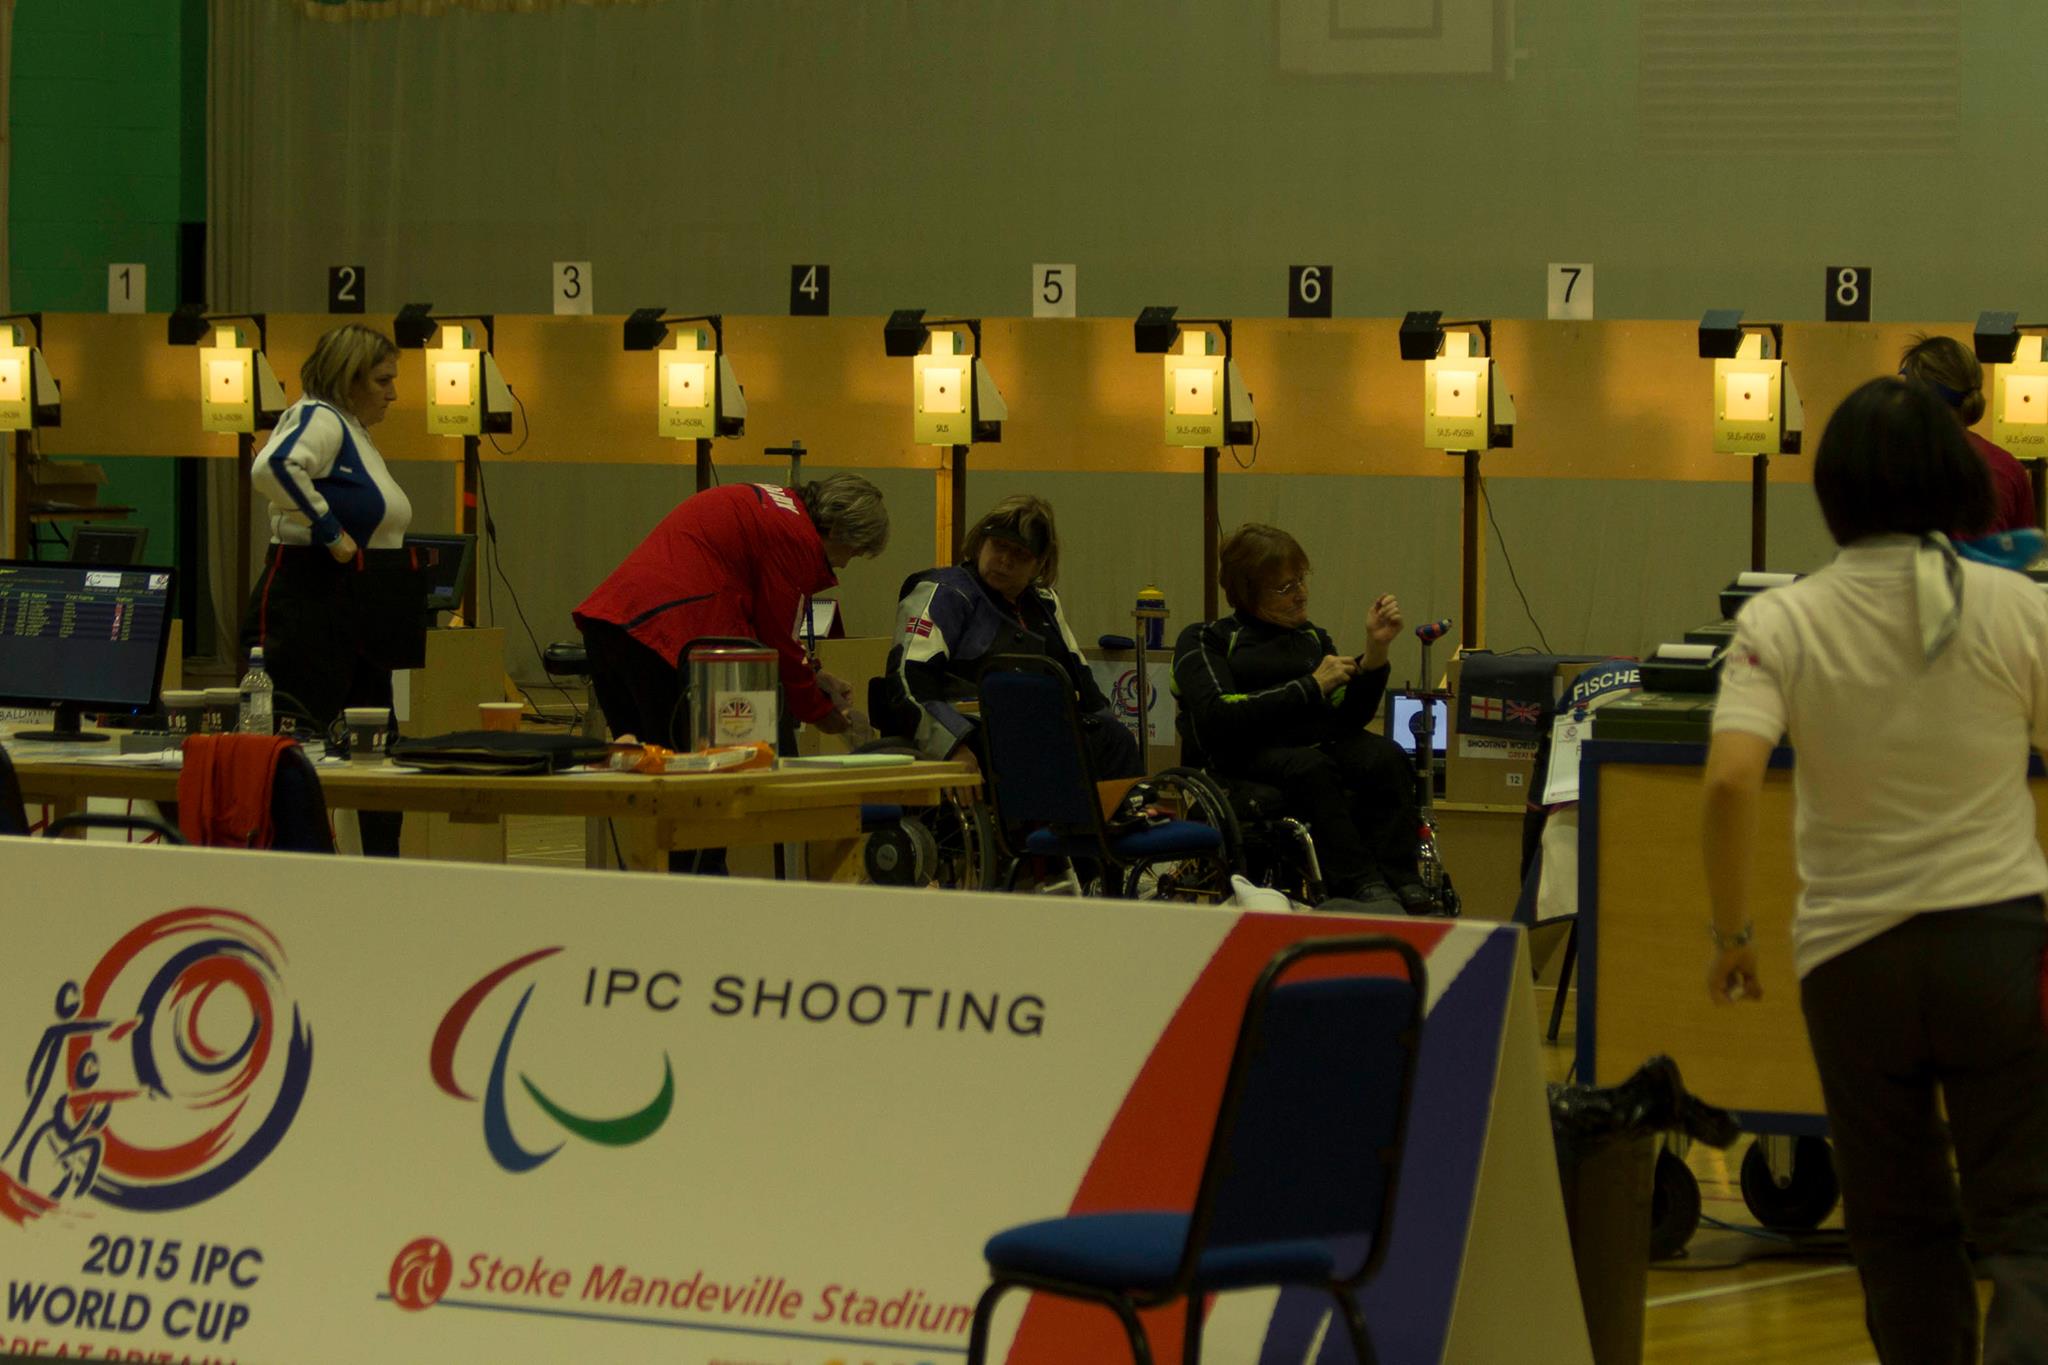 A total of 80 athletes are competing in the IPC Shooting World Cup at Stoke Mandeville ©Wheelpower